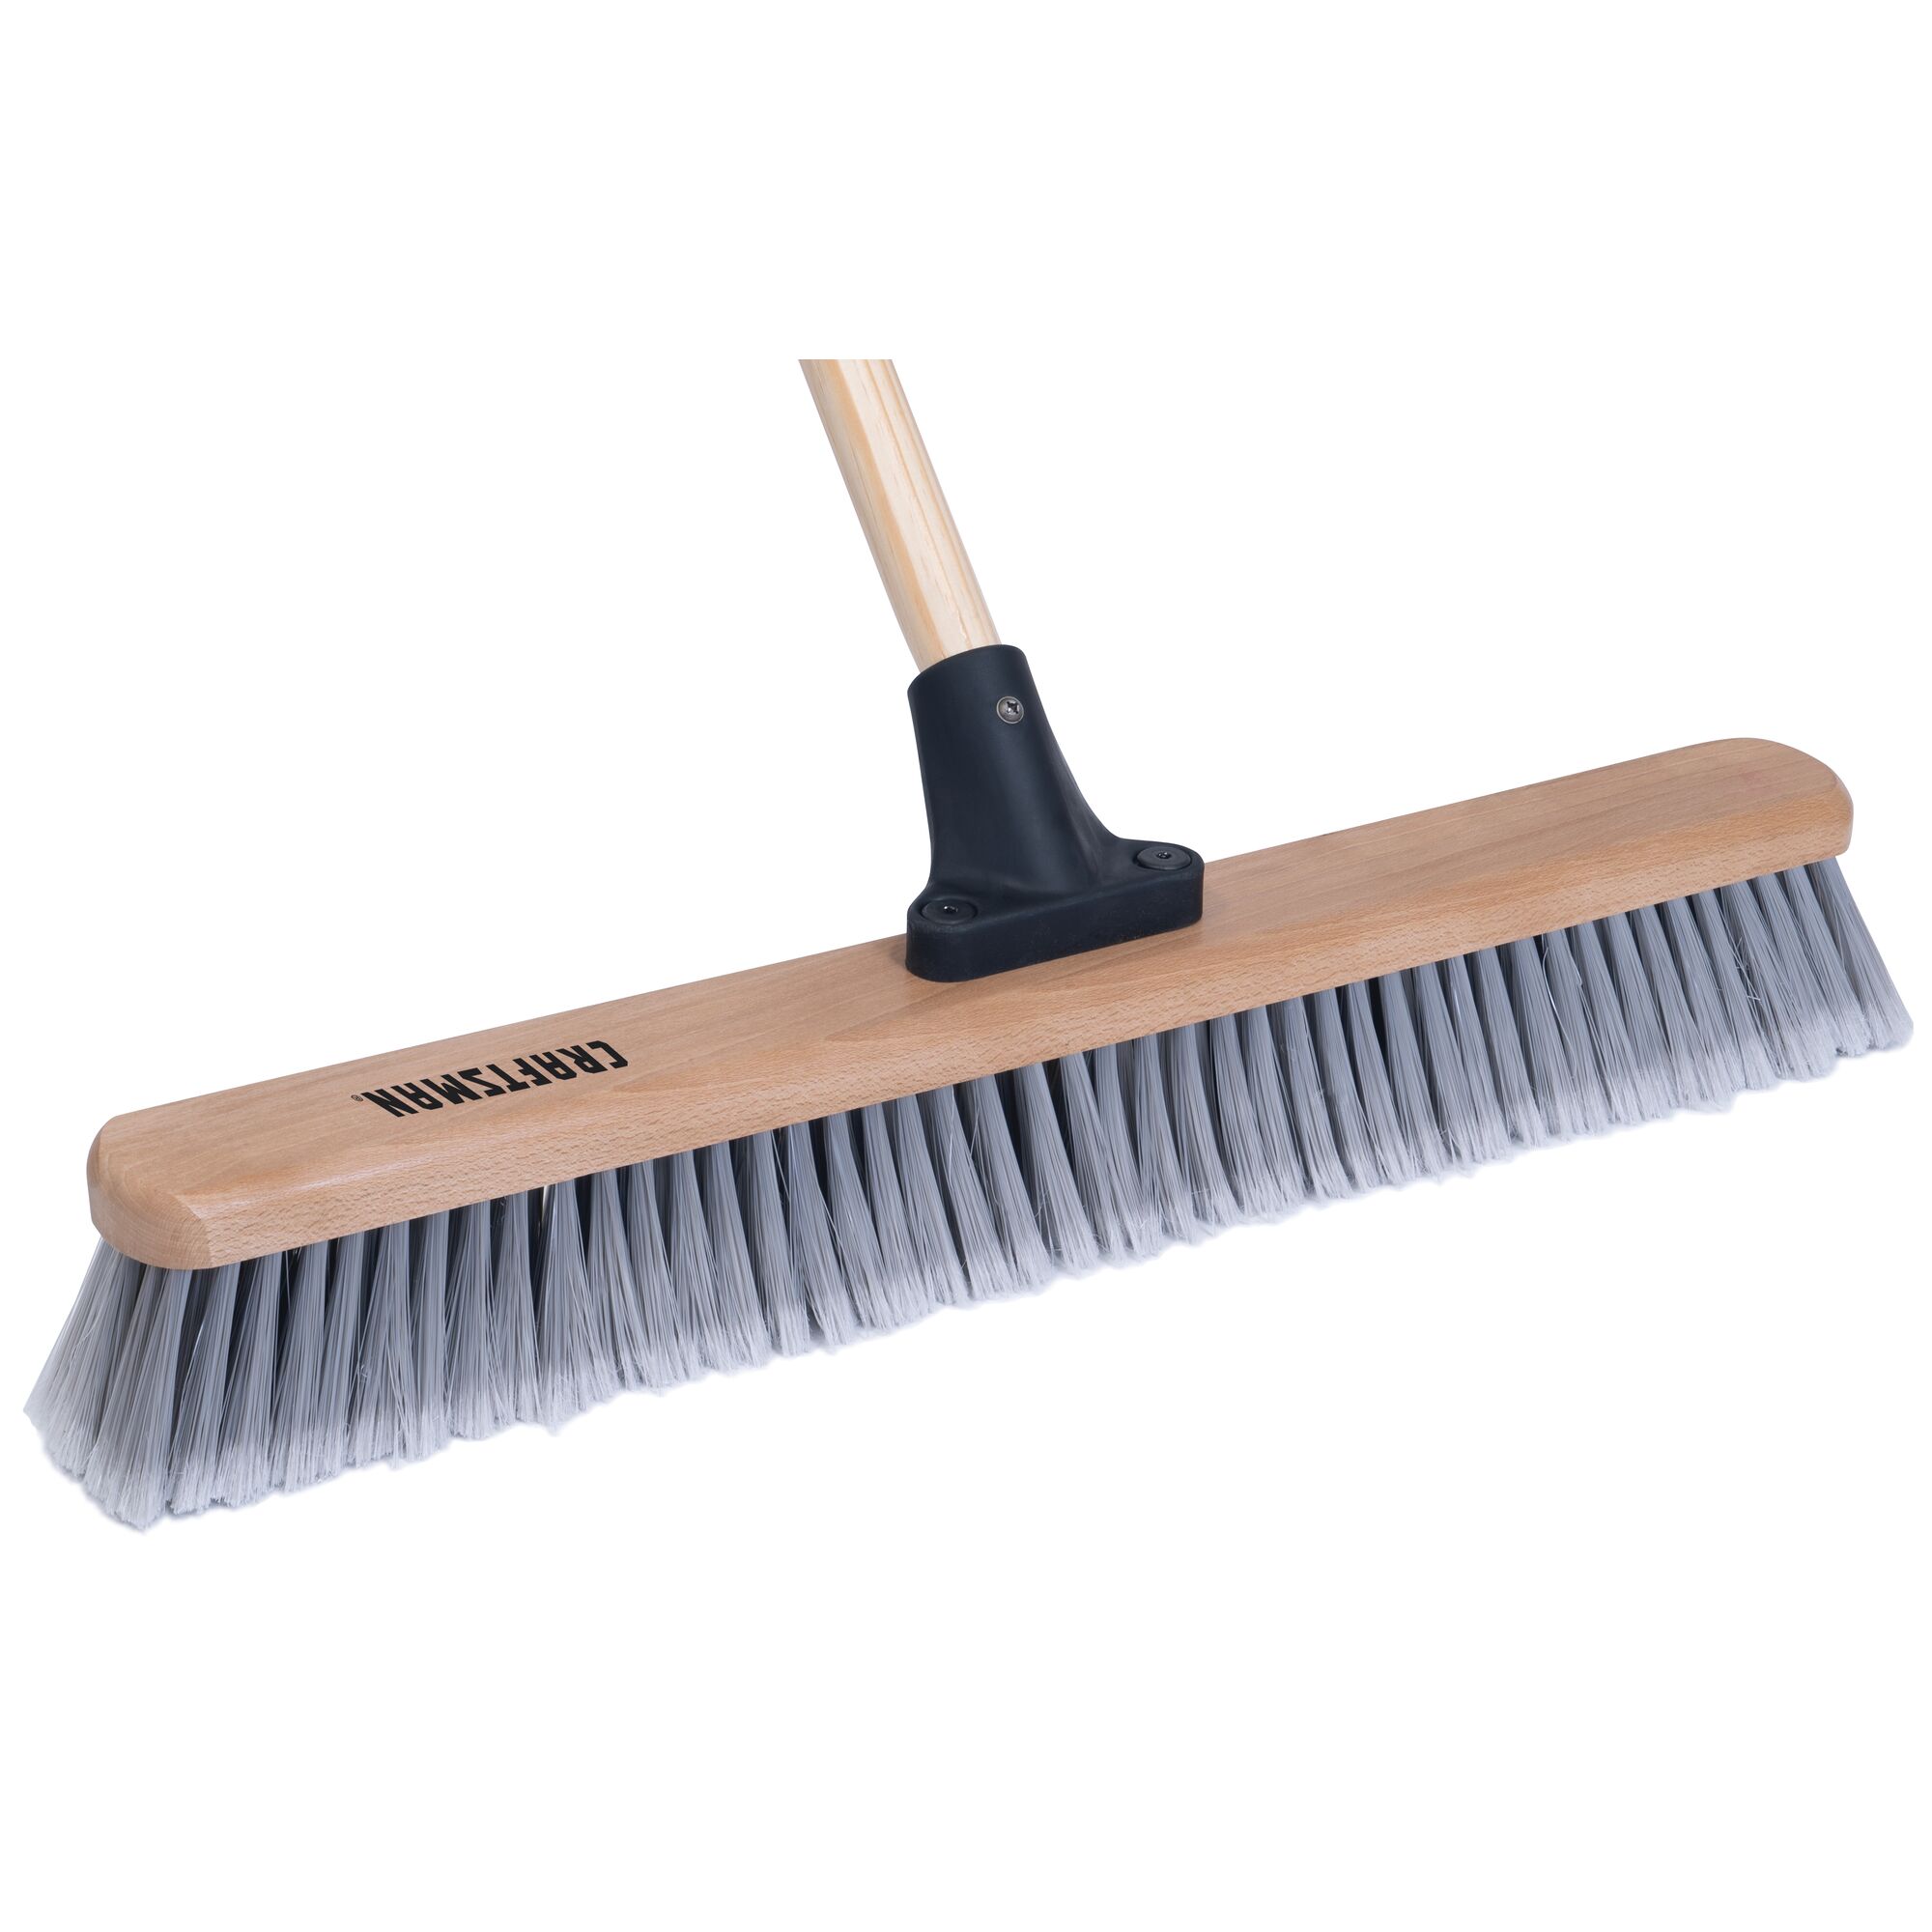 Profile of 24 inch shop and garage push broom.